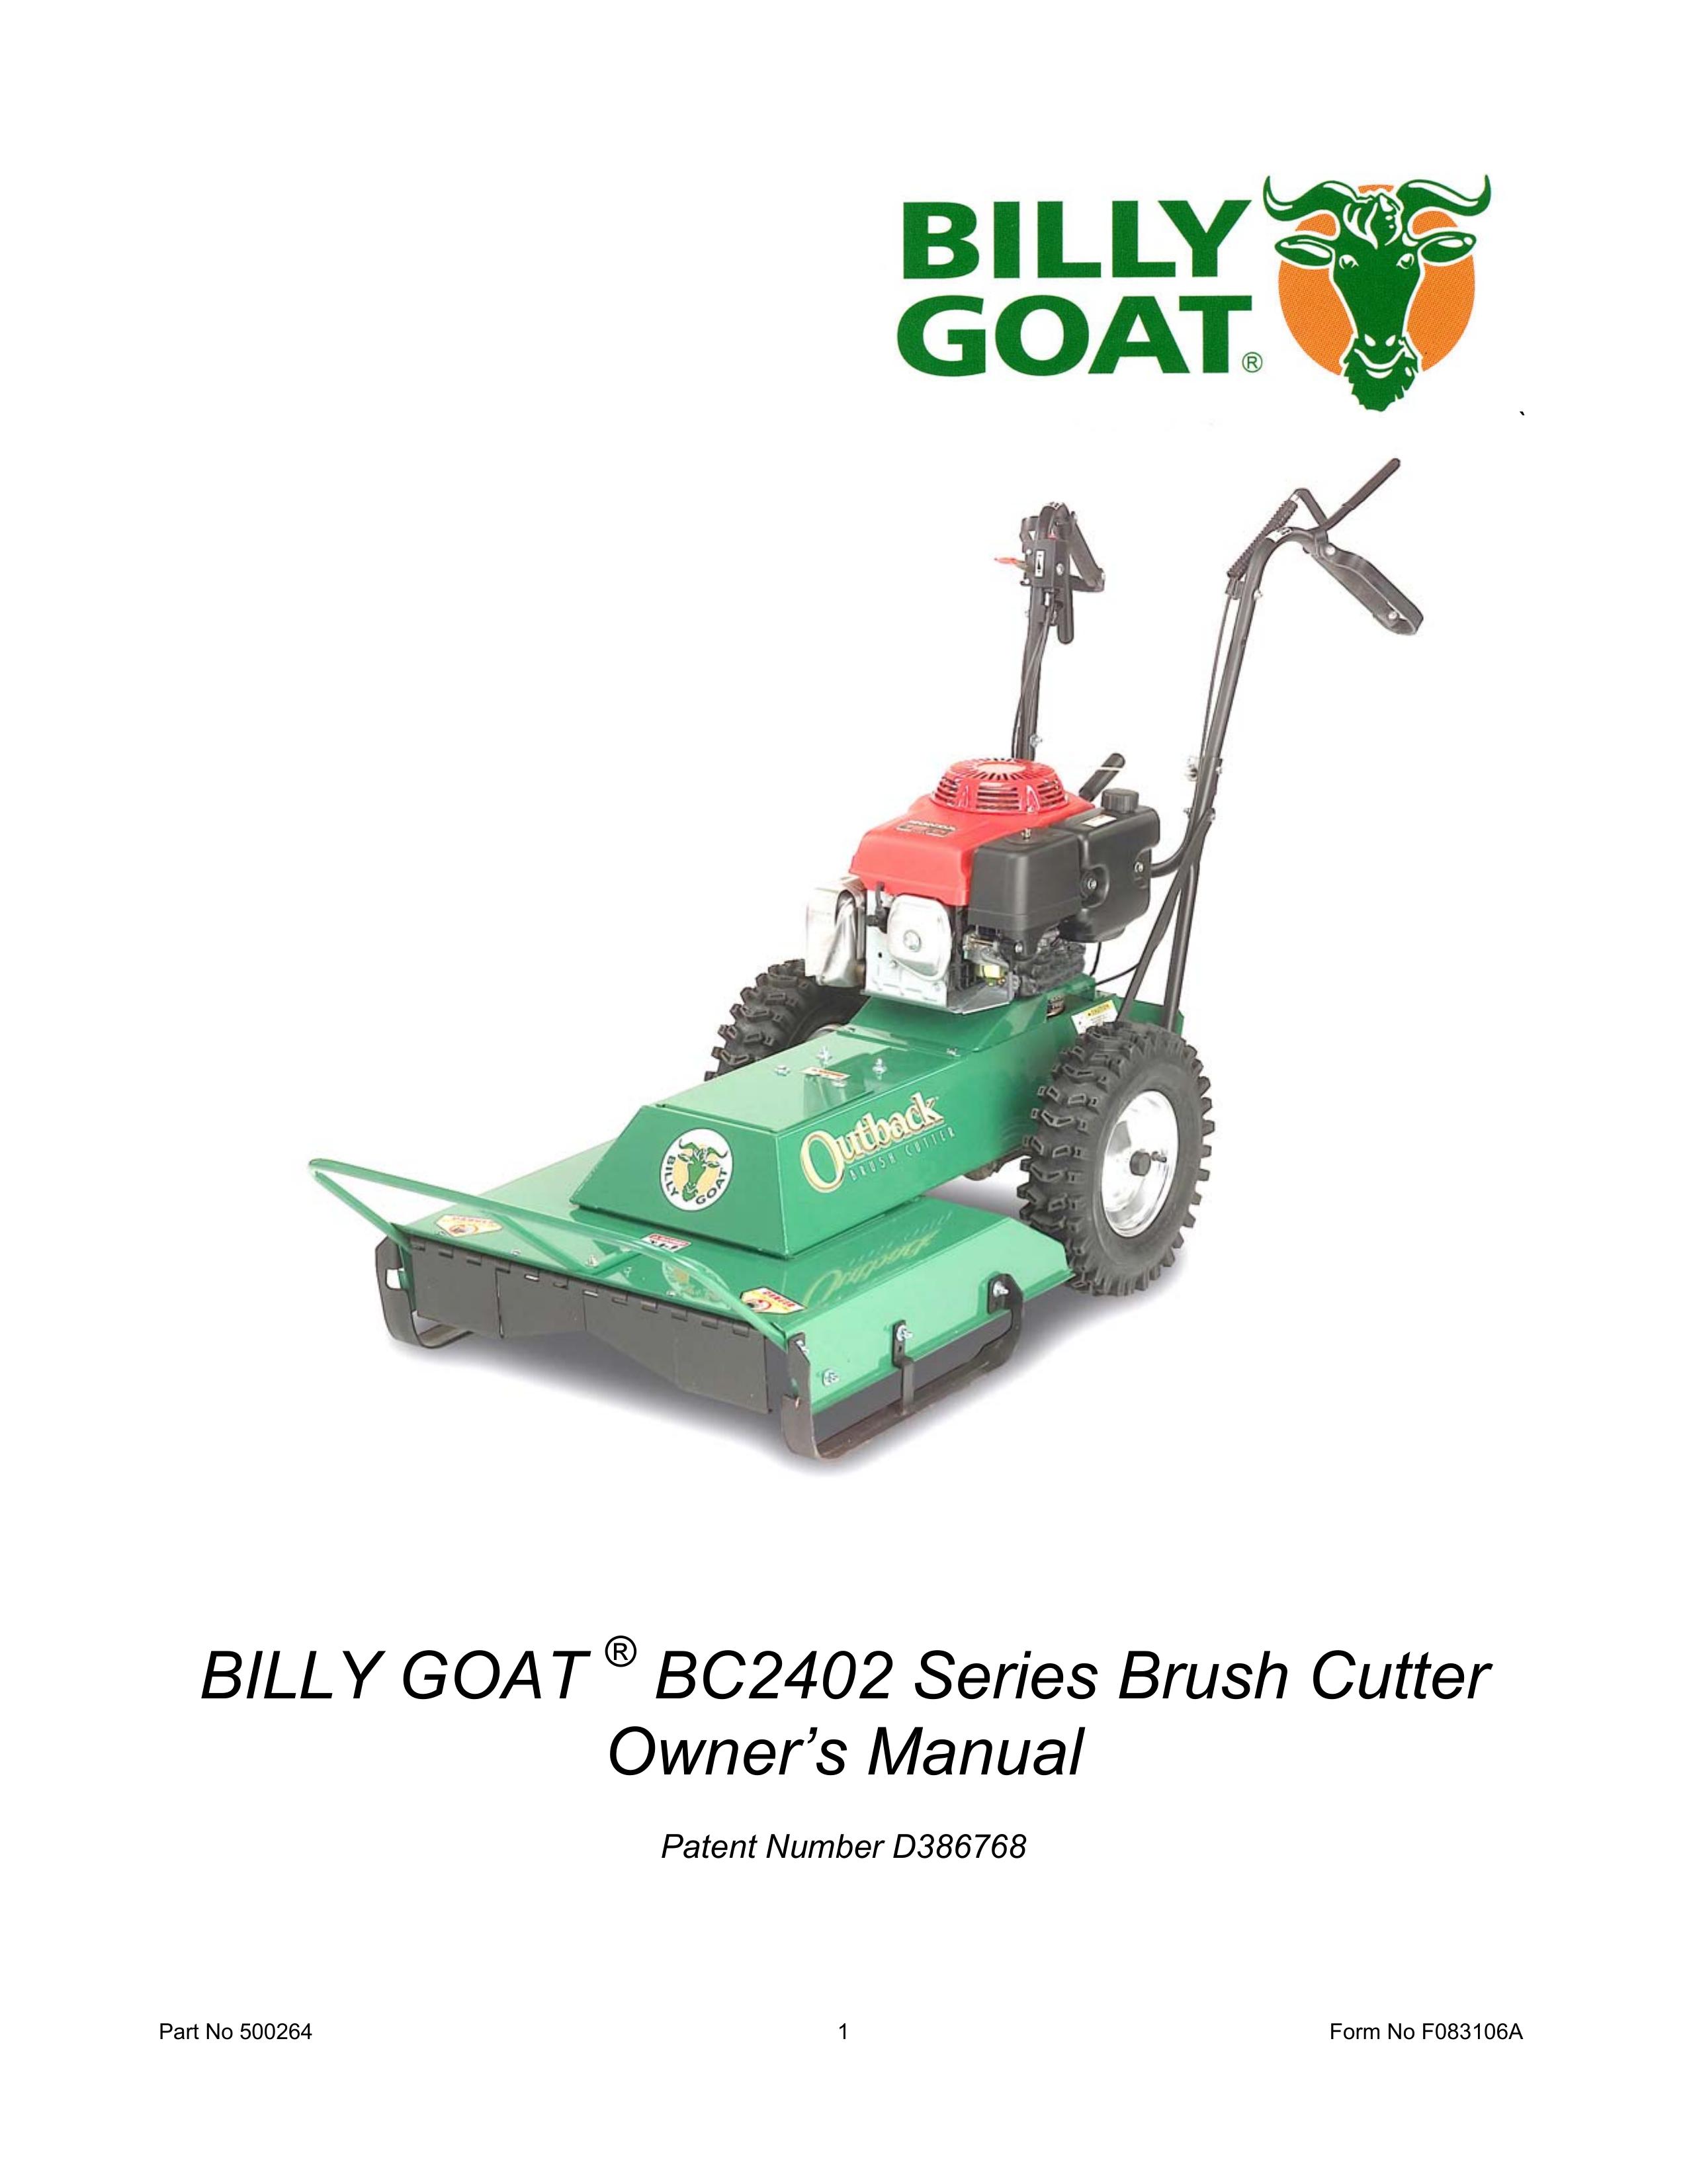 Billy Goat BC2402 Brush Cutter User Manual (Page 1)